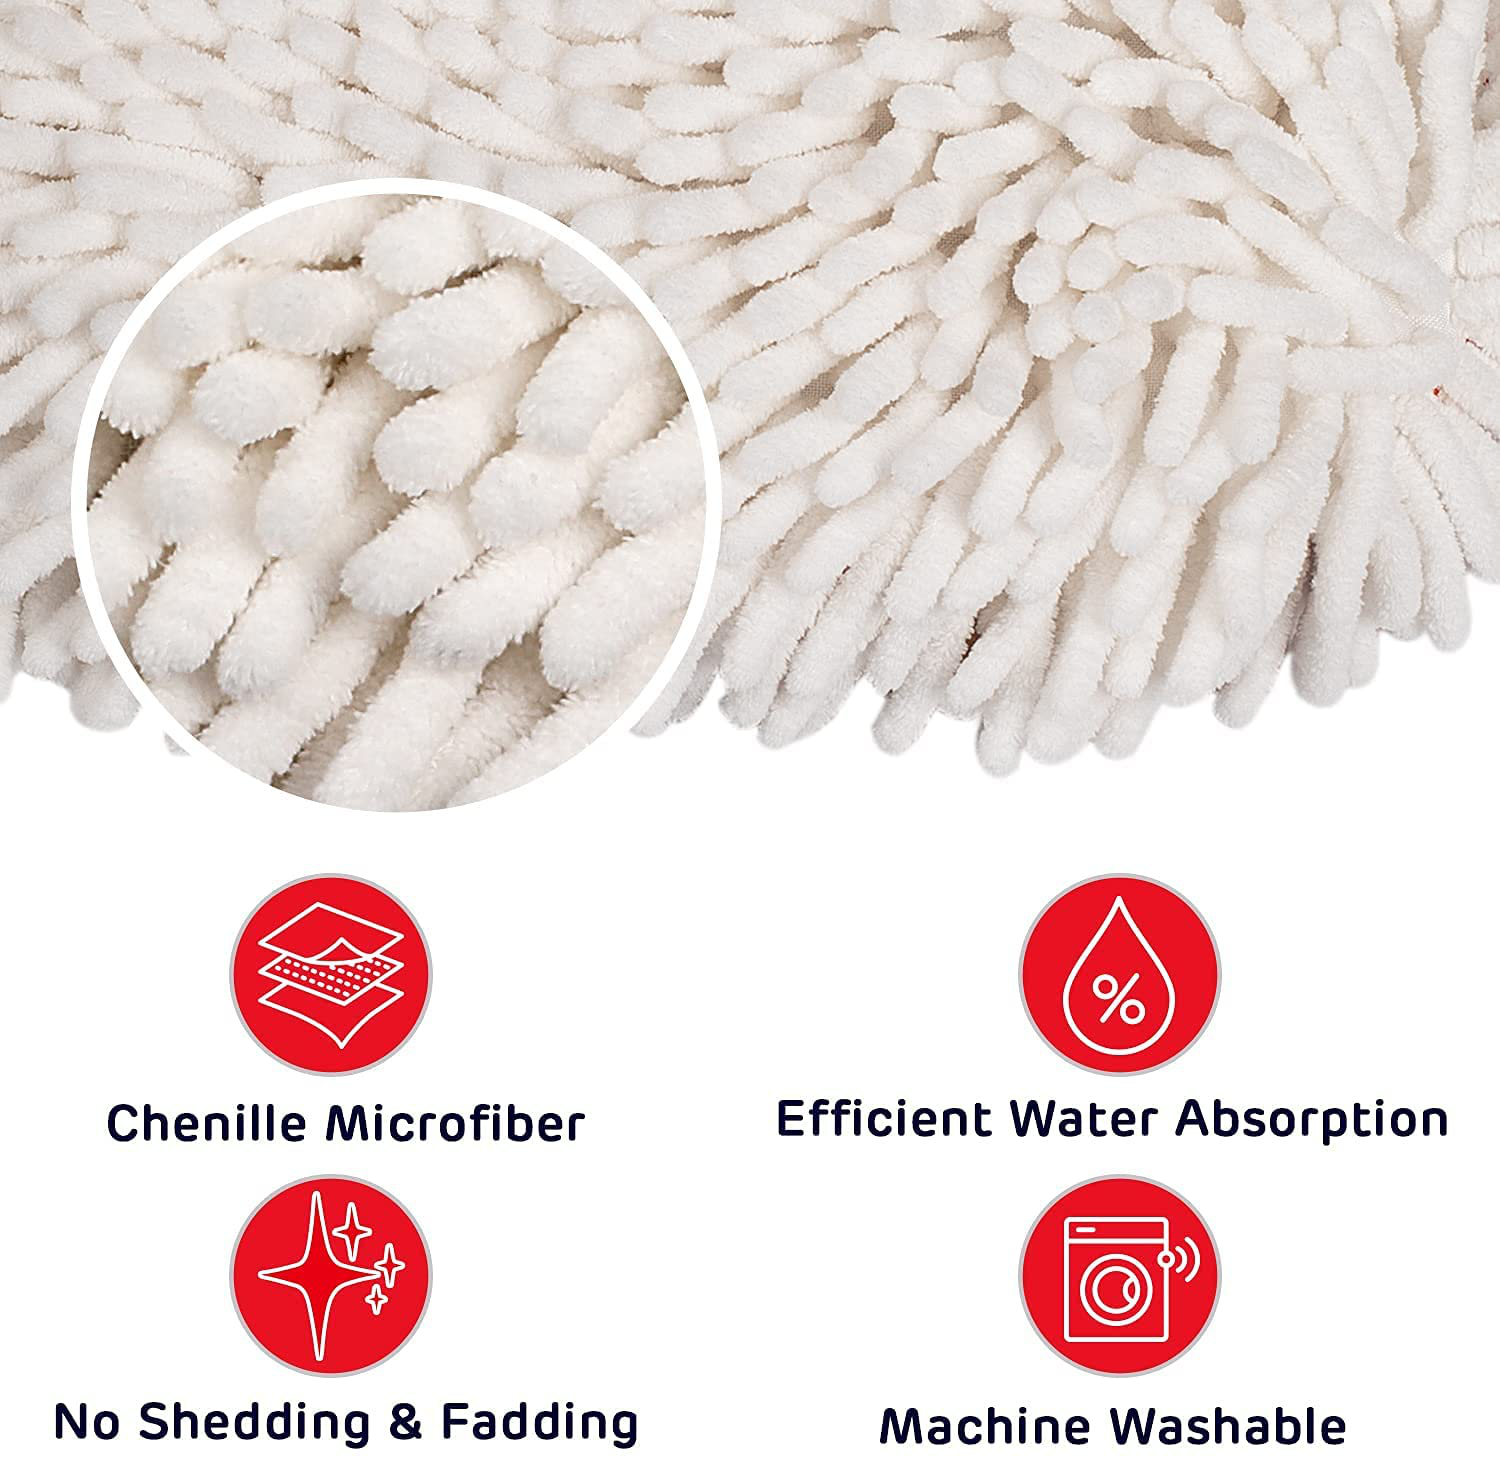 MS MASTER SHOW Car Wash Brush Mop with 2 Pcs Microfiber Mop Mitt Labor-Saving Curve Design Car Cleaning Supplies Kit Extendable Scratch-Free Car Wash Mop Thickened Aluminum Alloy Rod